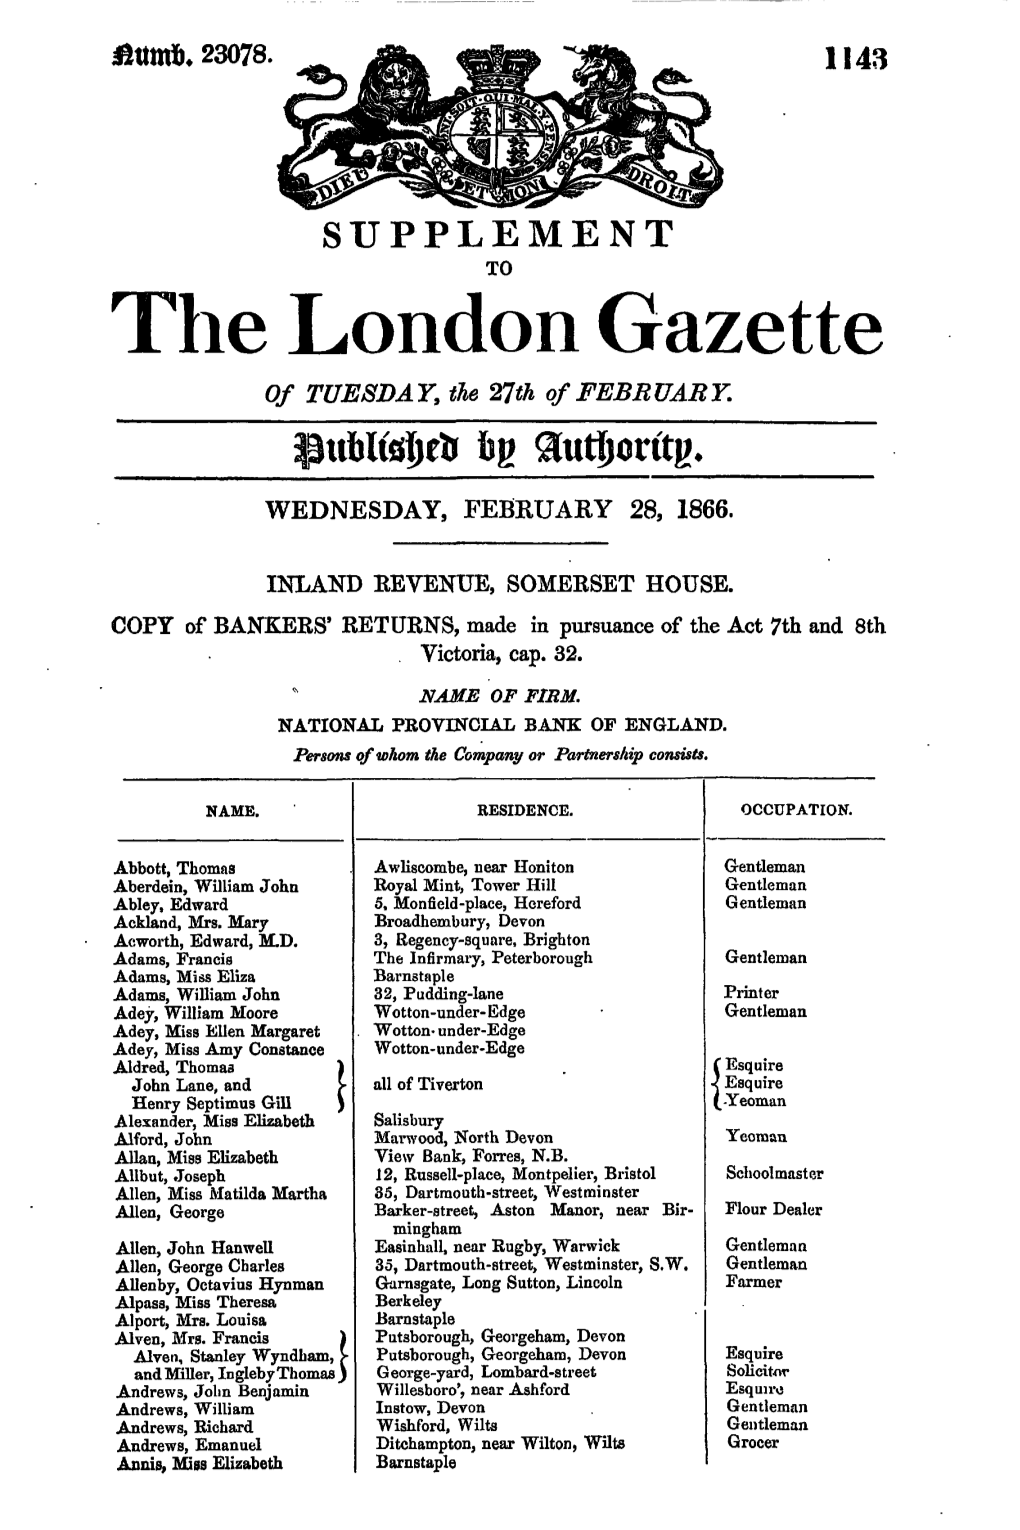 The London Gazette of TUESDAY, the 27Th of FEBRUARY